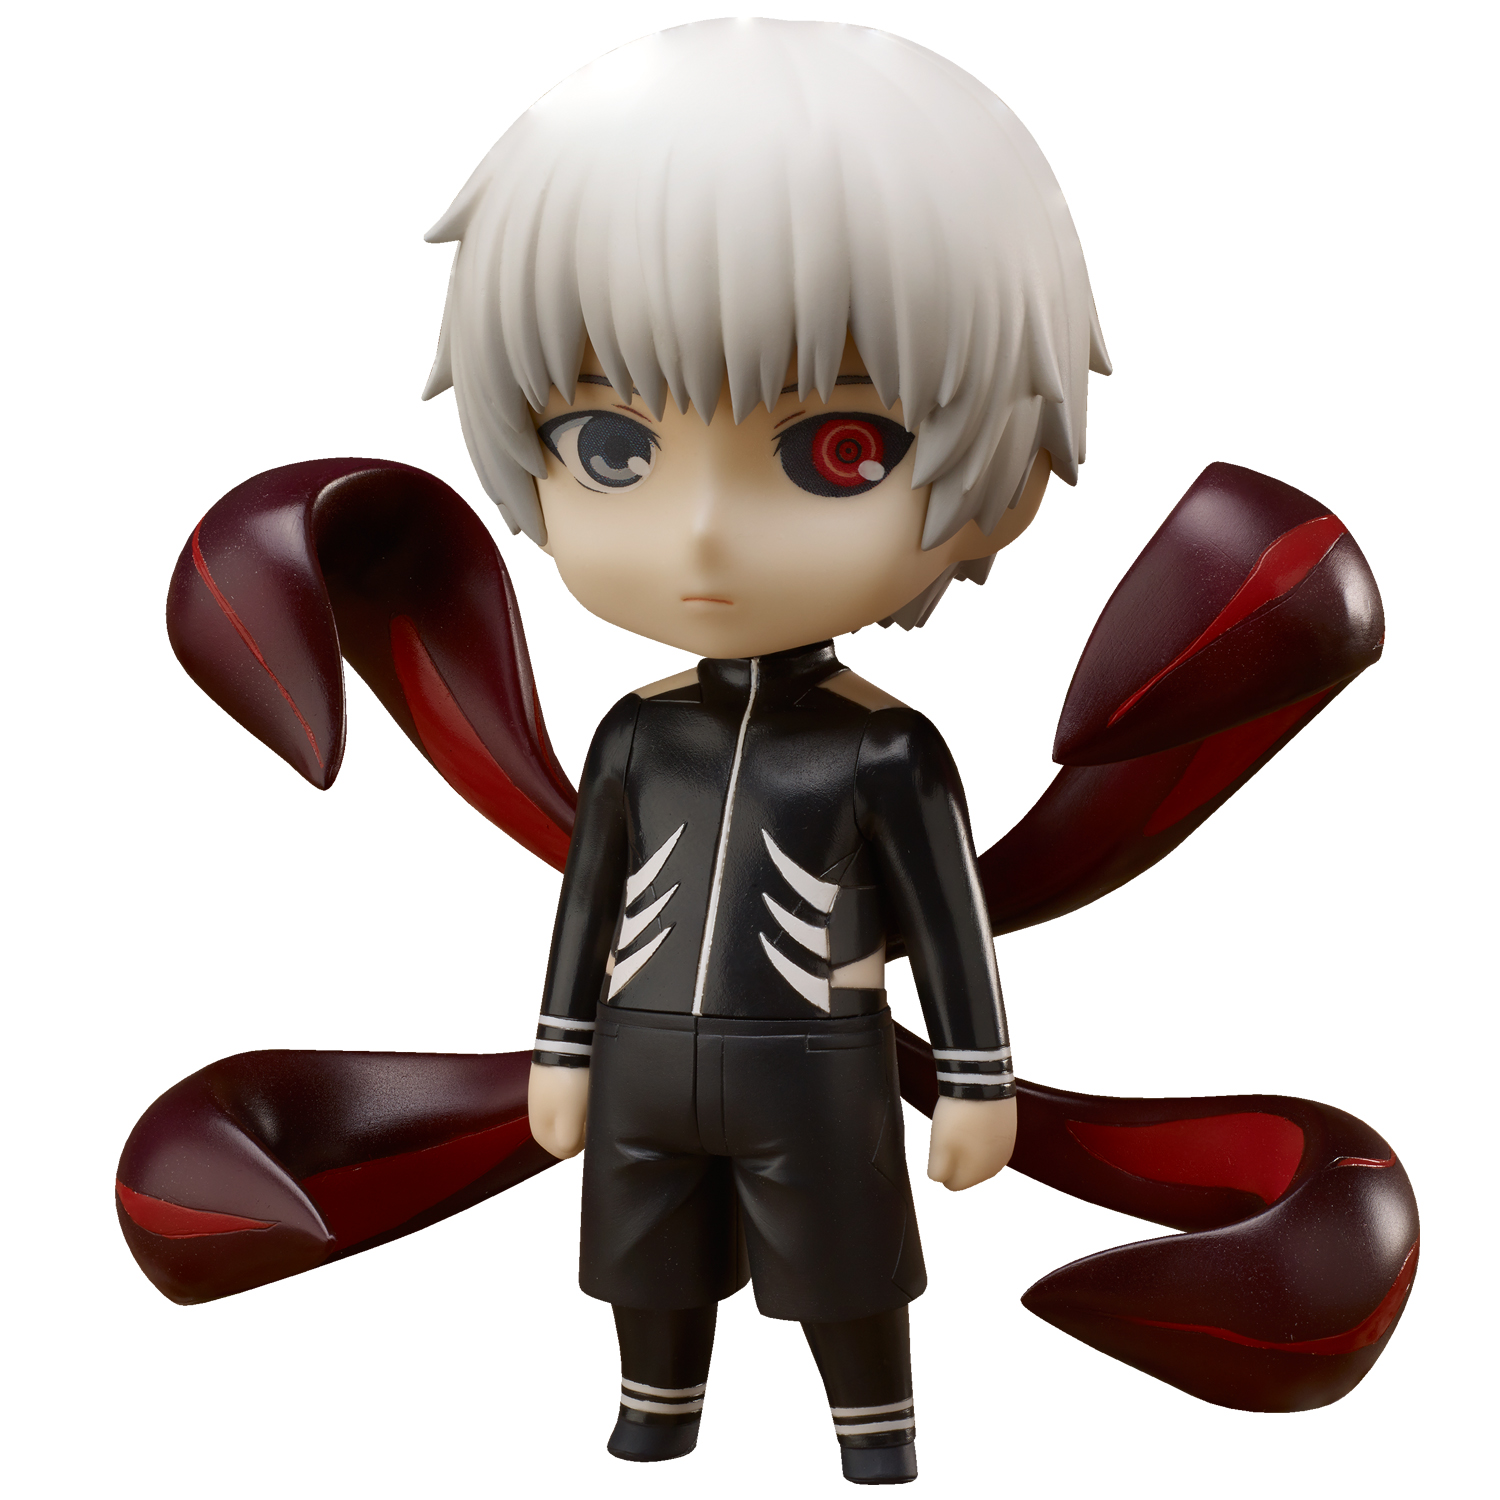 Ken Kaneki Plush Online Shopping Mall Find The Best Prices And Places To Buy